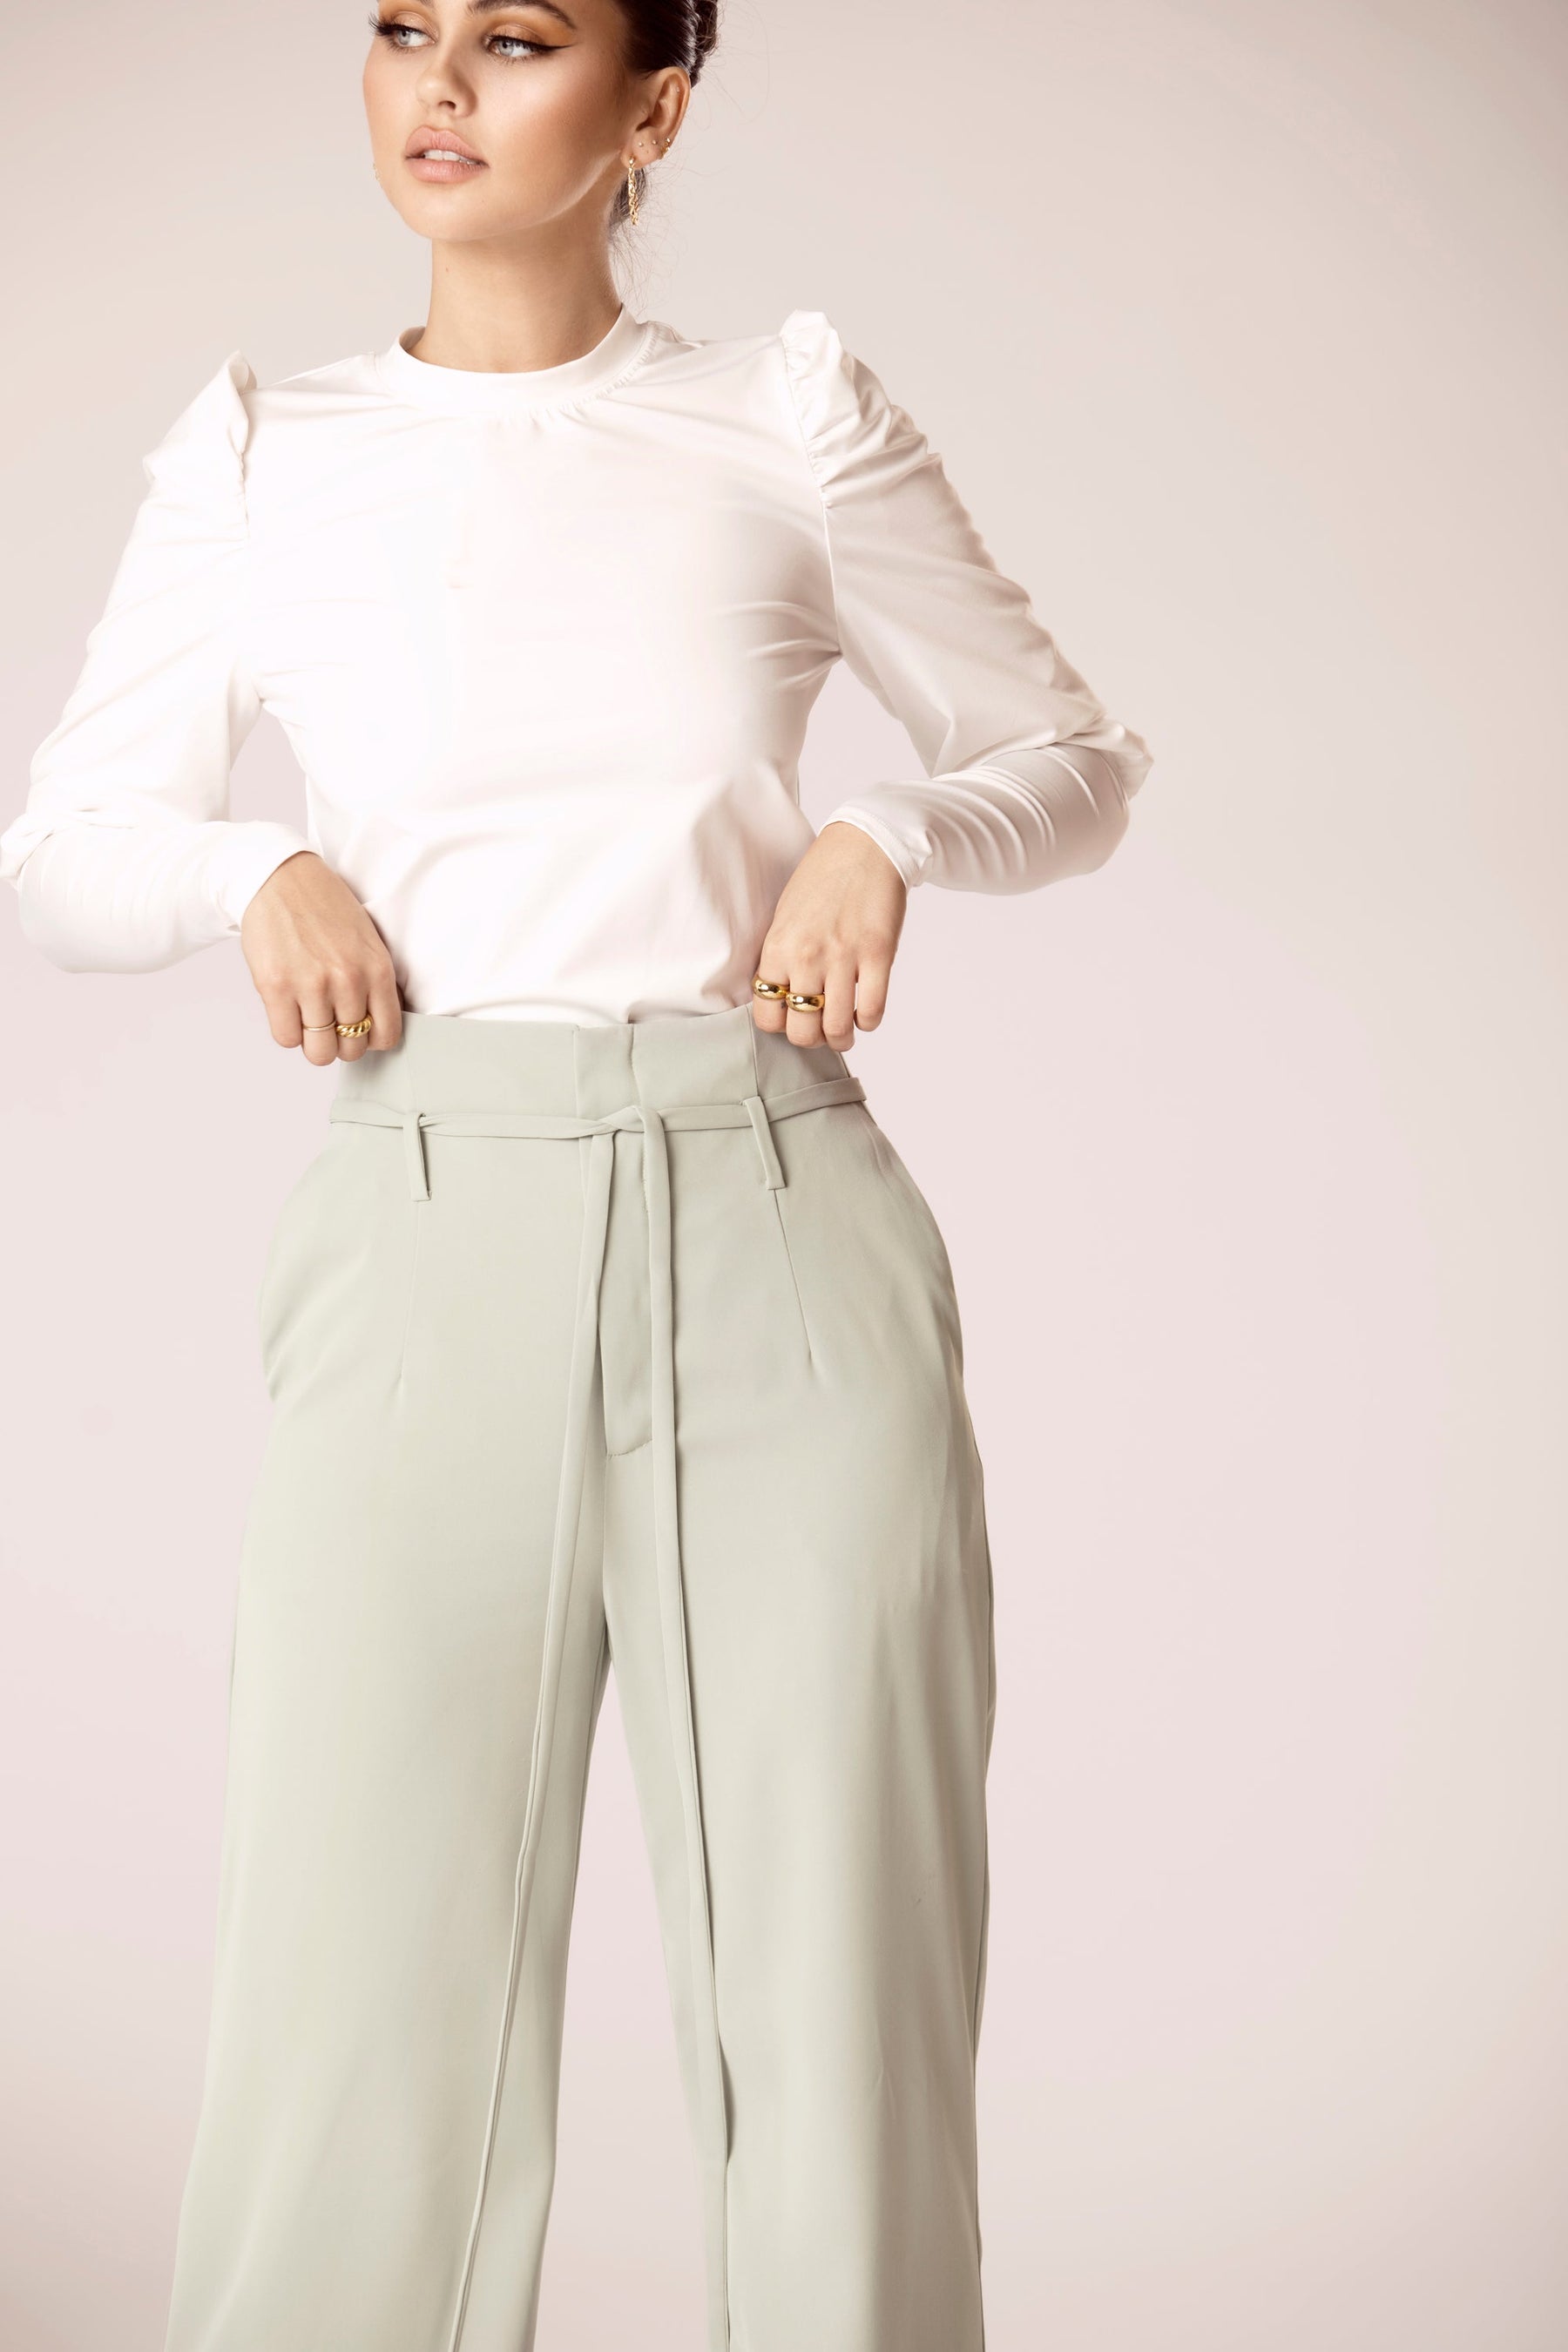 Lama High Rise Pants - Light Green Veiled Collection 